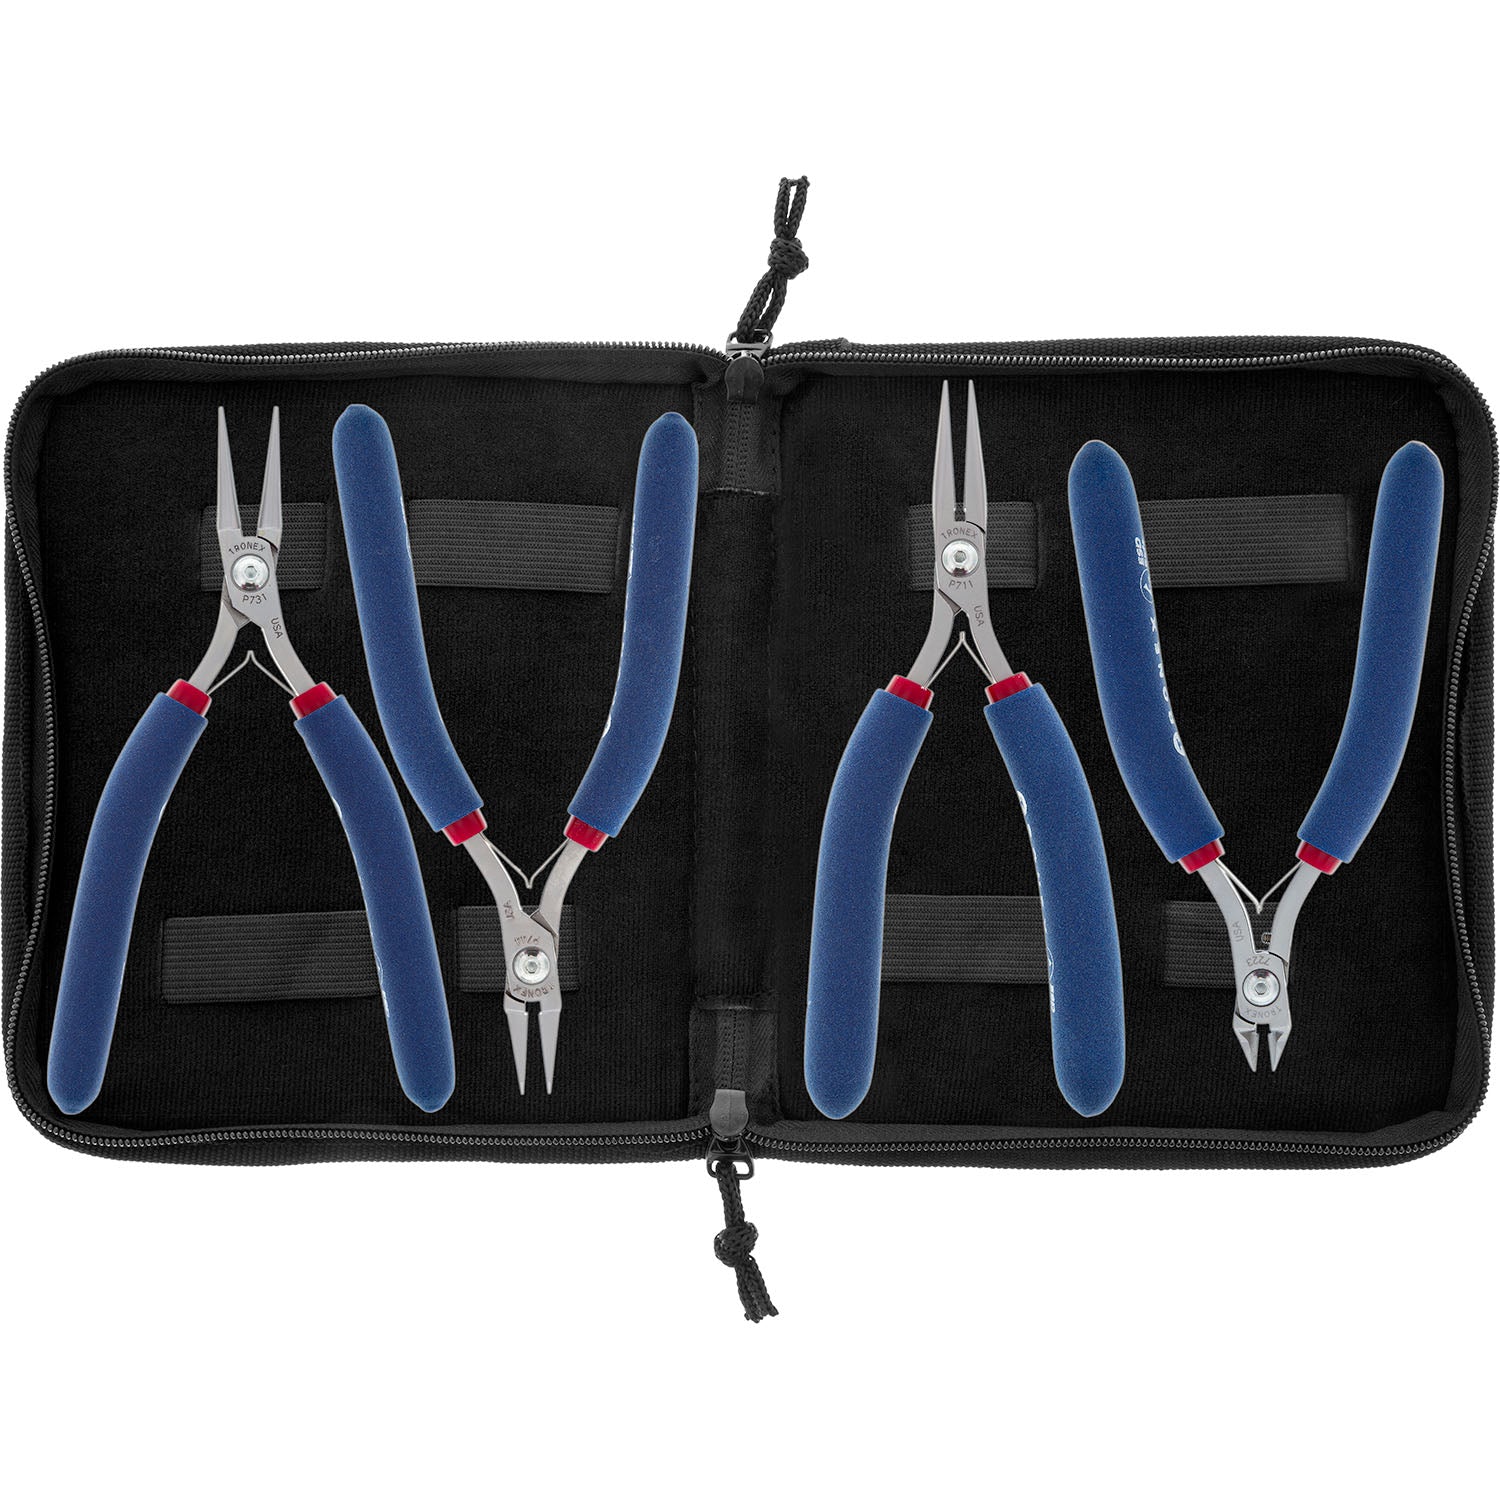 Tronex 6 Piece General Purpose Pliers & Cutters Set With Wood Stand (Long  Ergonomic Handles)